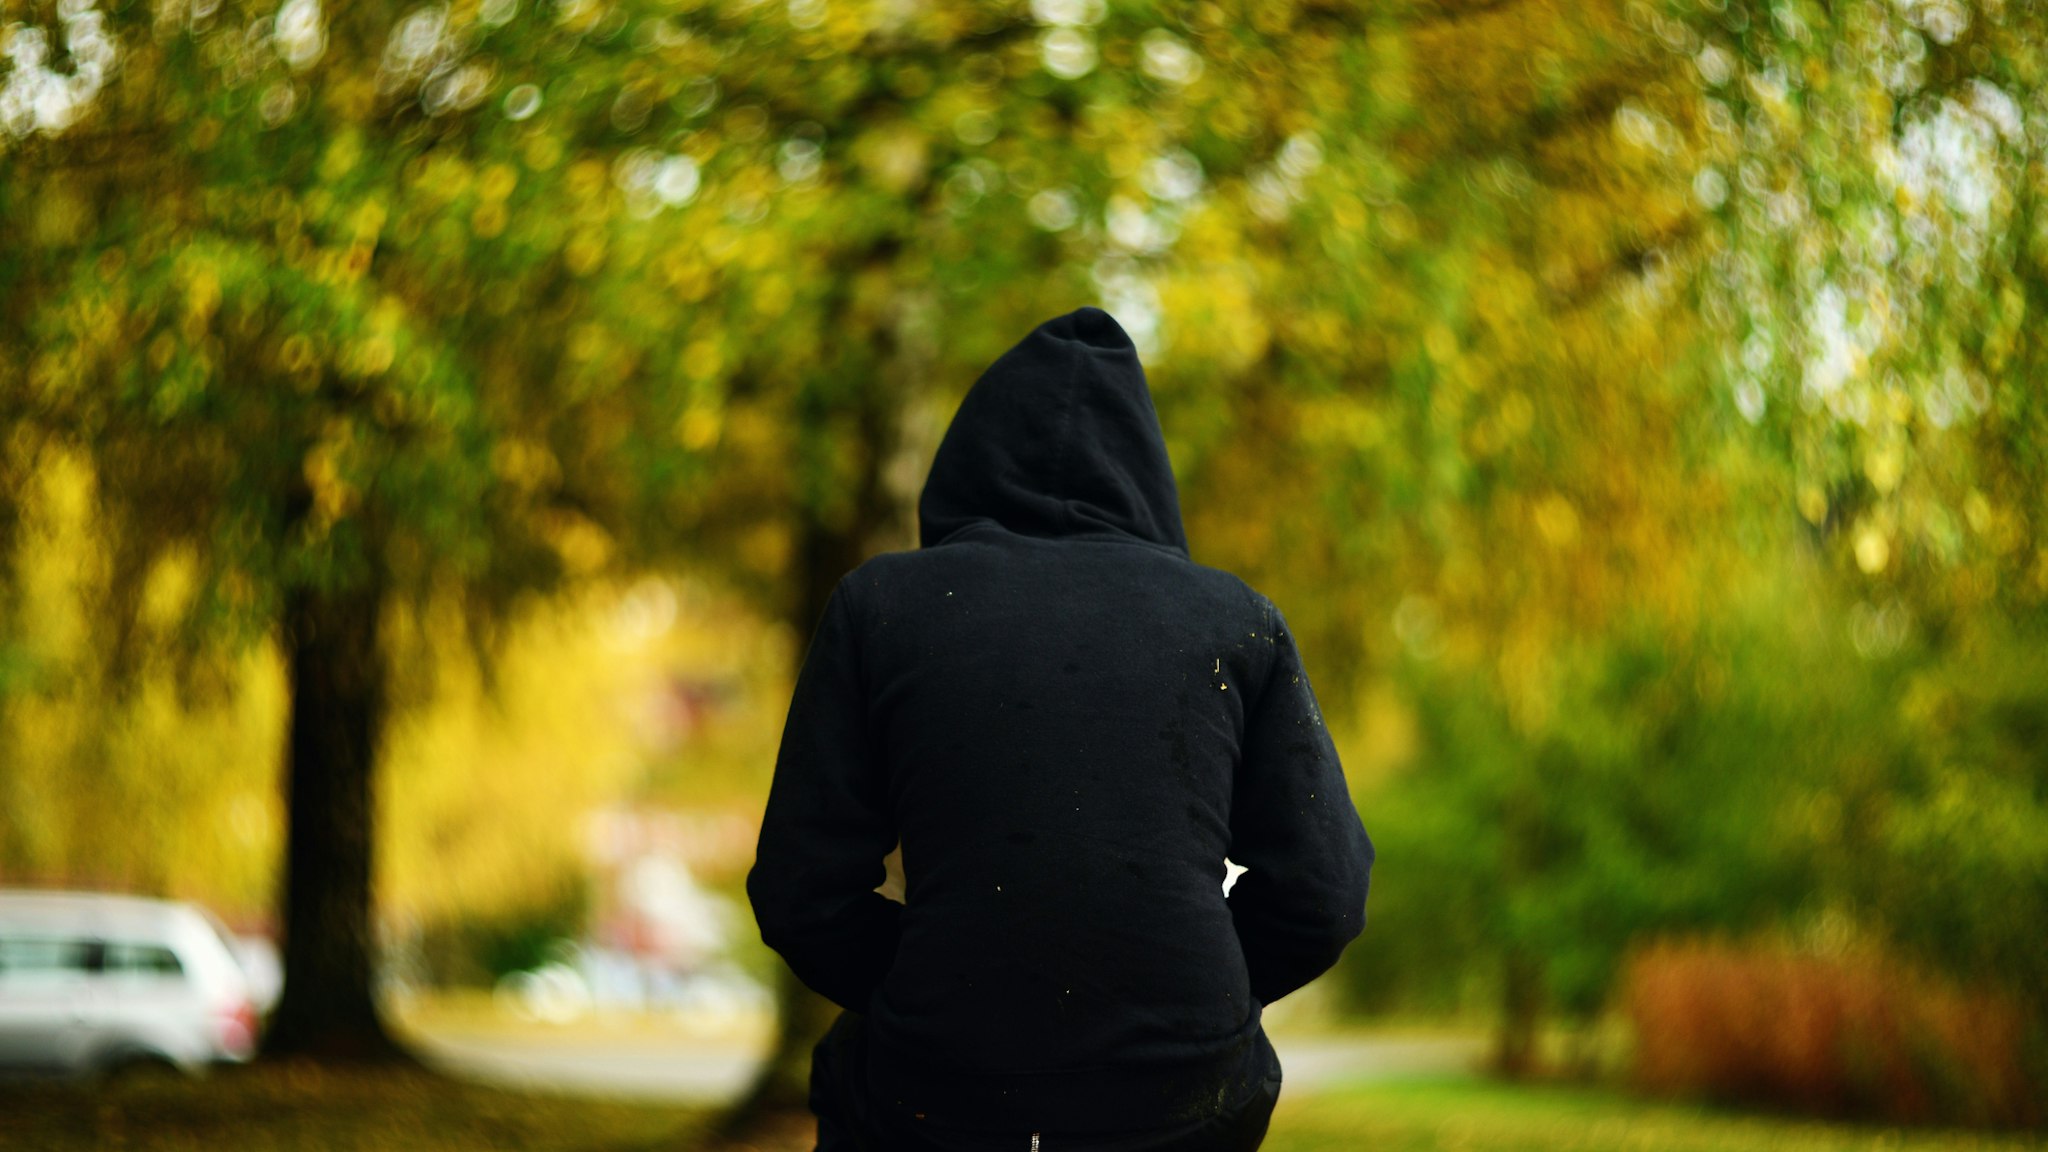 A girl in black hooded shirt with hoodie on her head sitting on a bench - stock photo